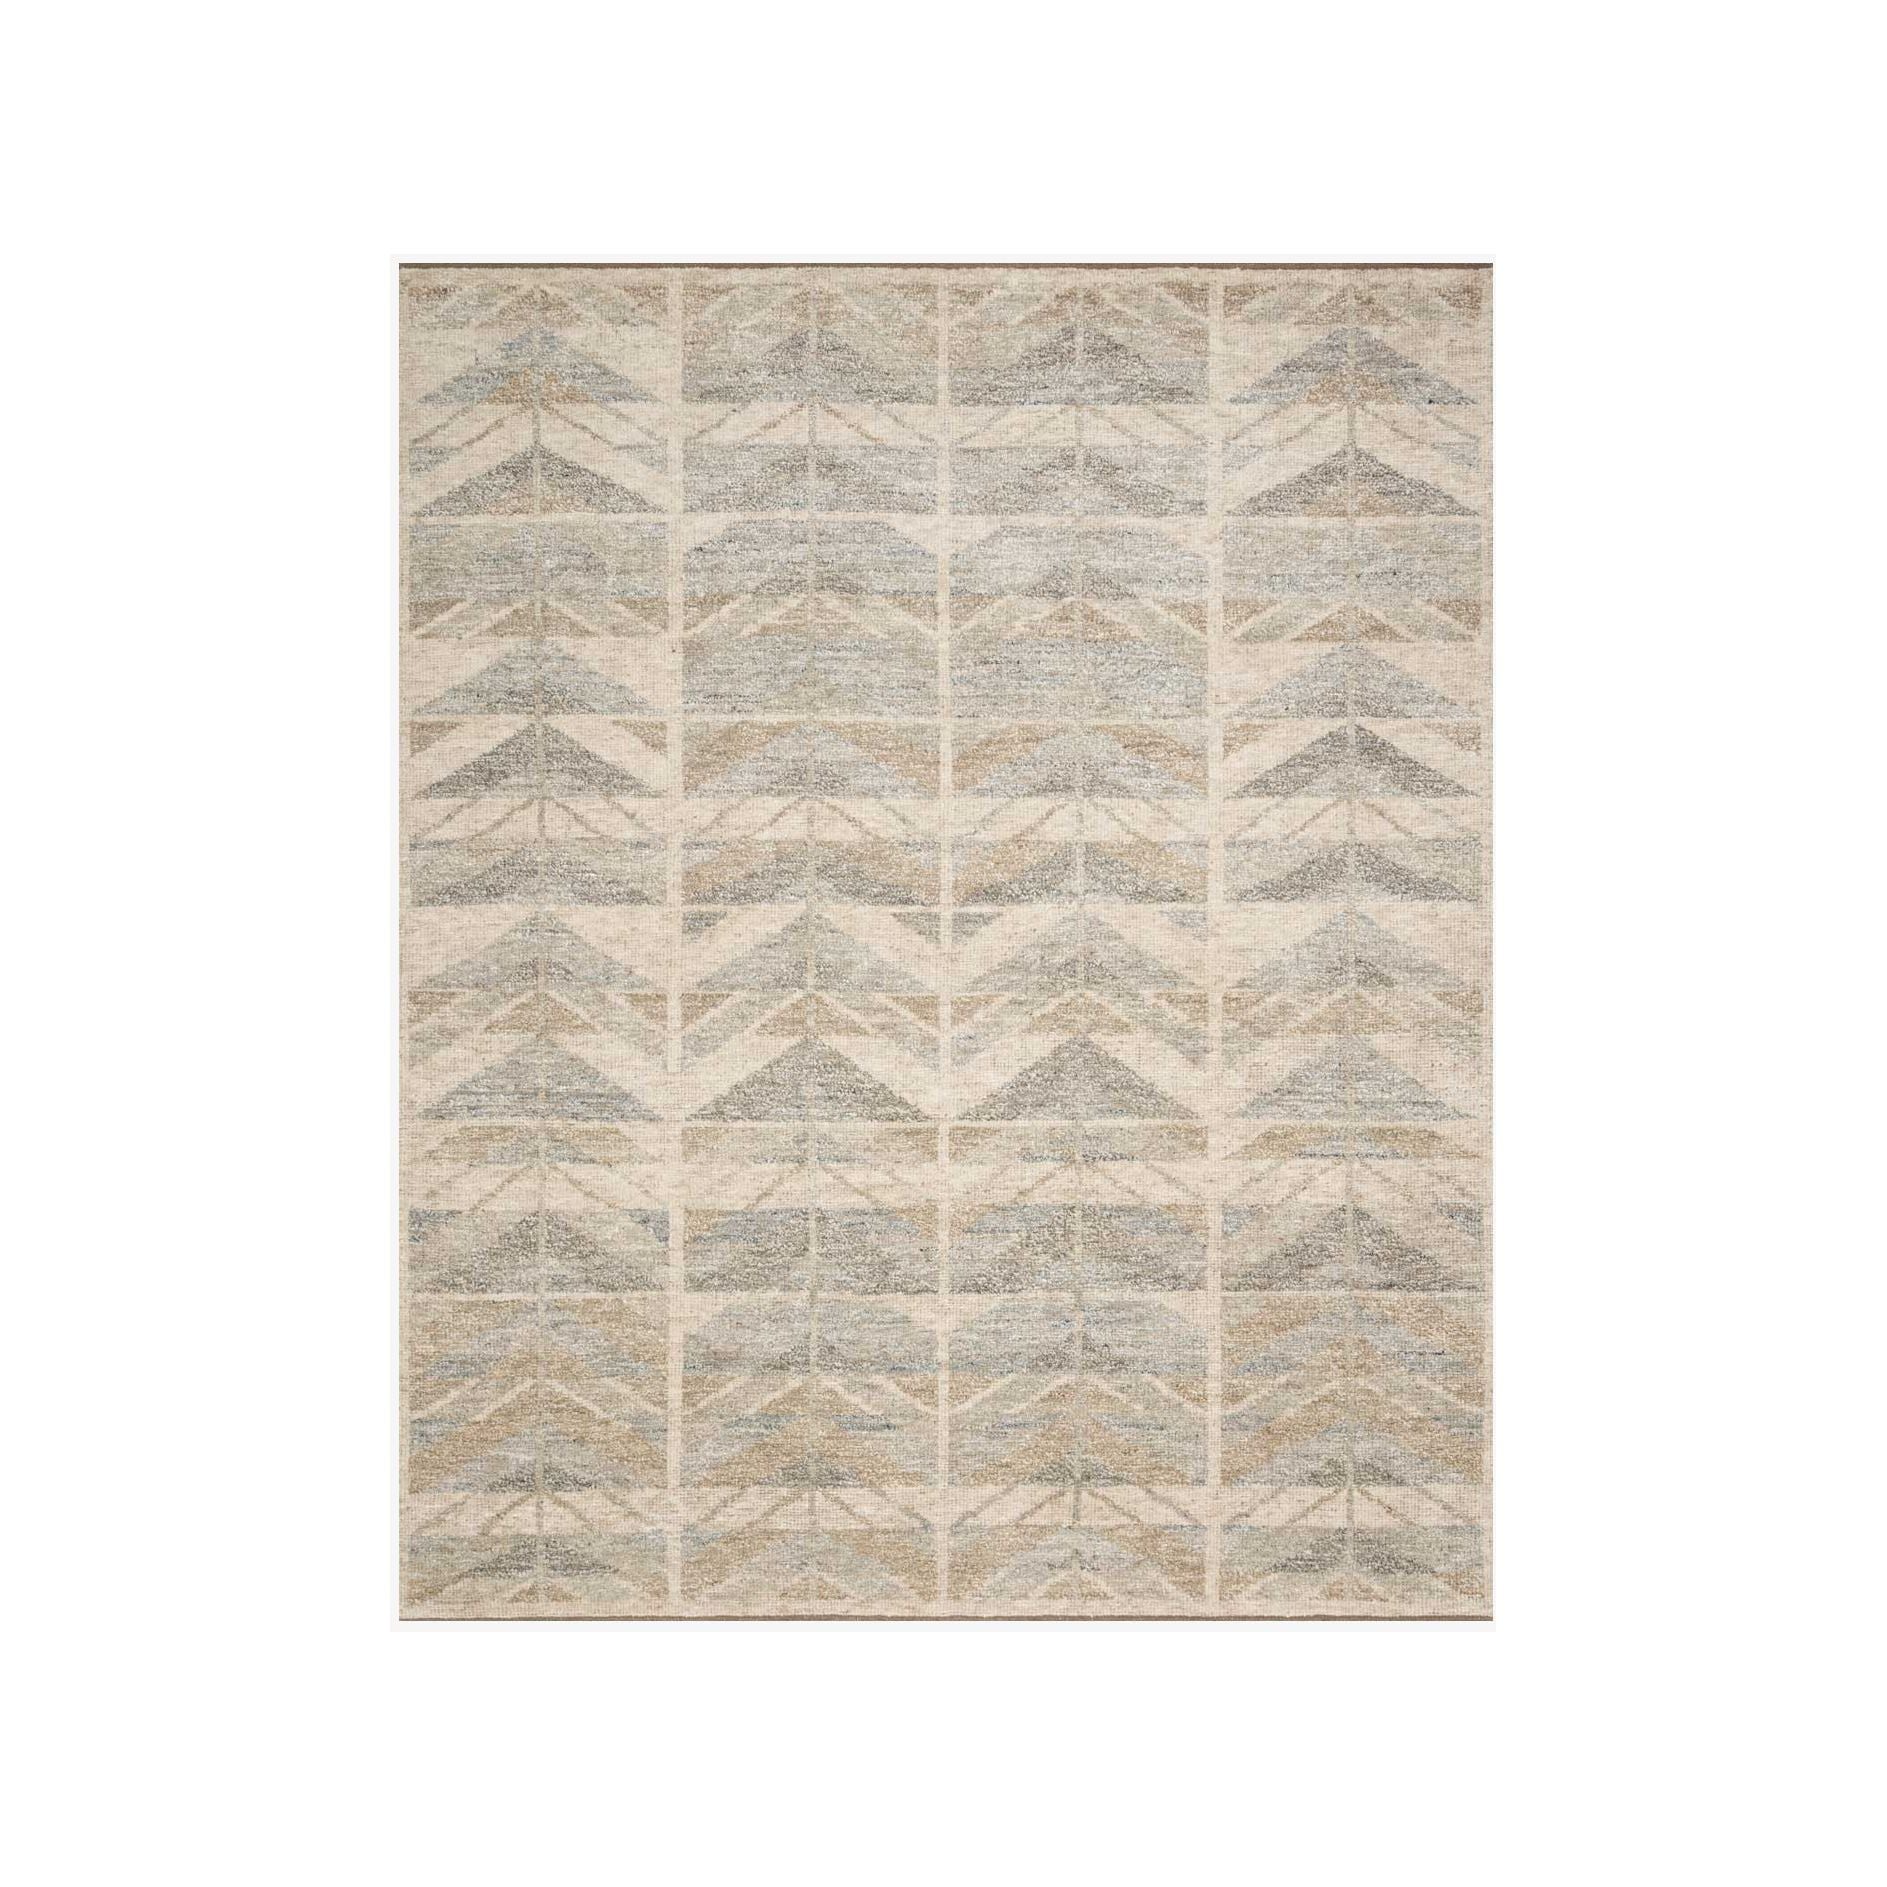 Drawing inspiration from tribal influences, the Odyssey Neutral Area Rug combines relaxed linear pattern with a sophisticated color palette. Each Odyssey area rug, which is hand knotted of wool, viscose, and cotton, is crafted entirely by hand by master artisans in India. A beautiful choice for a living room, entryway, or other high traffic area.   Hand Knotted 60% Wool | 30% Viscose | 10% Cotton OD-05 Netural